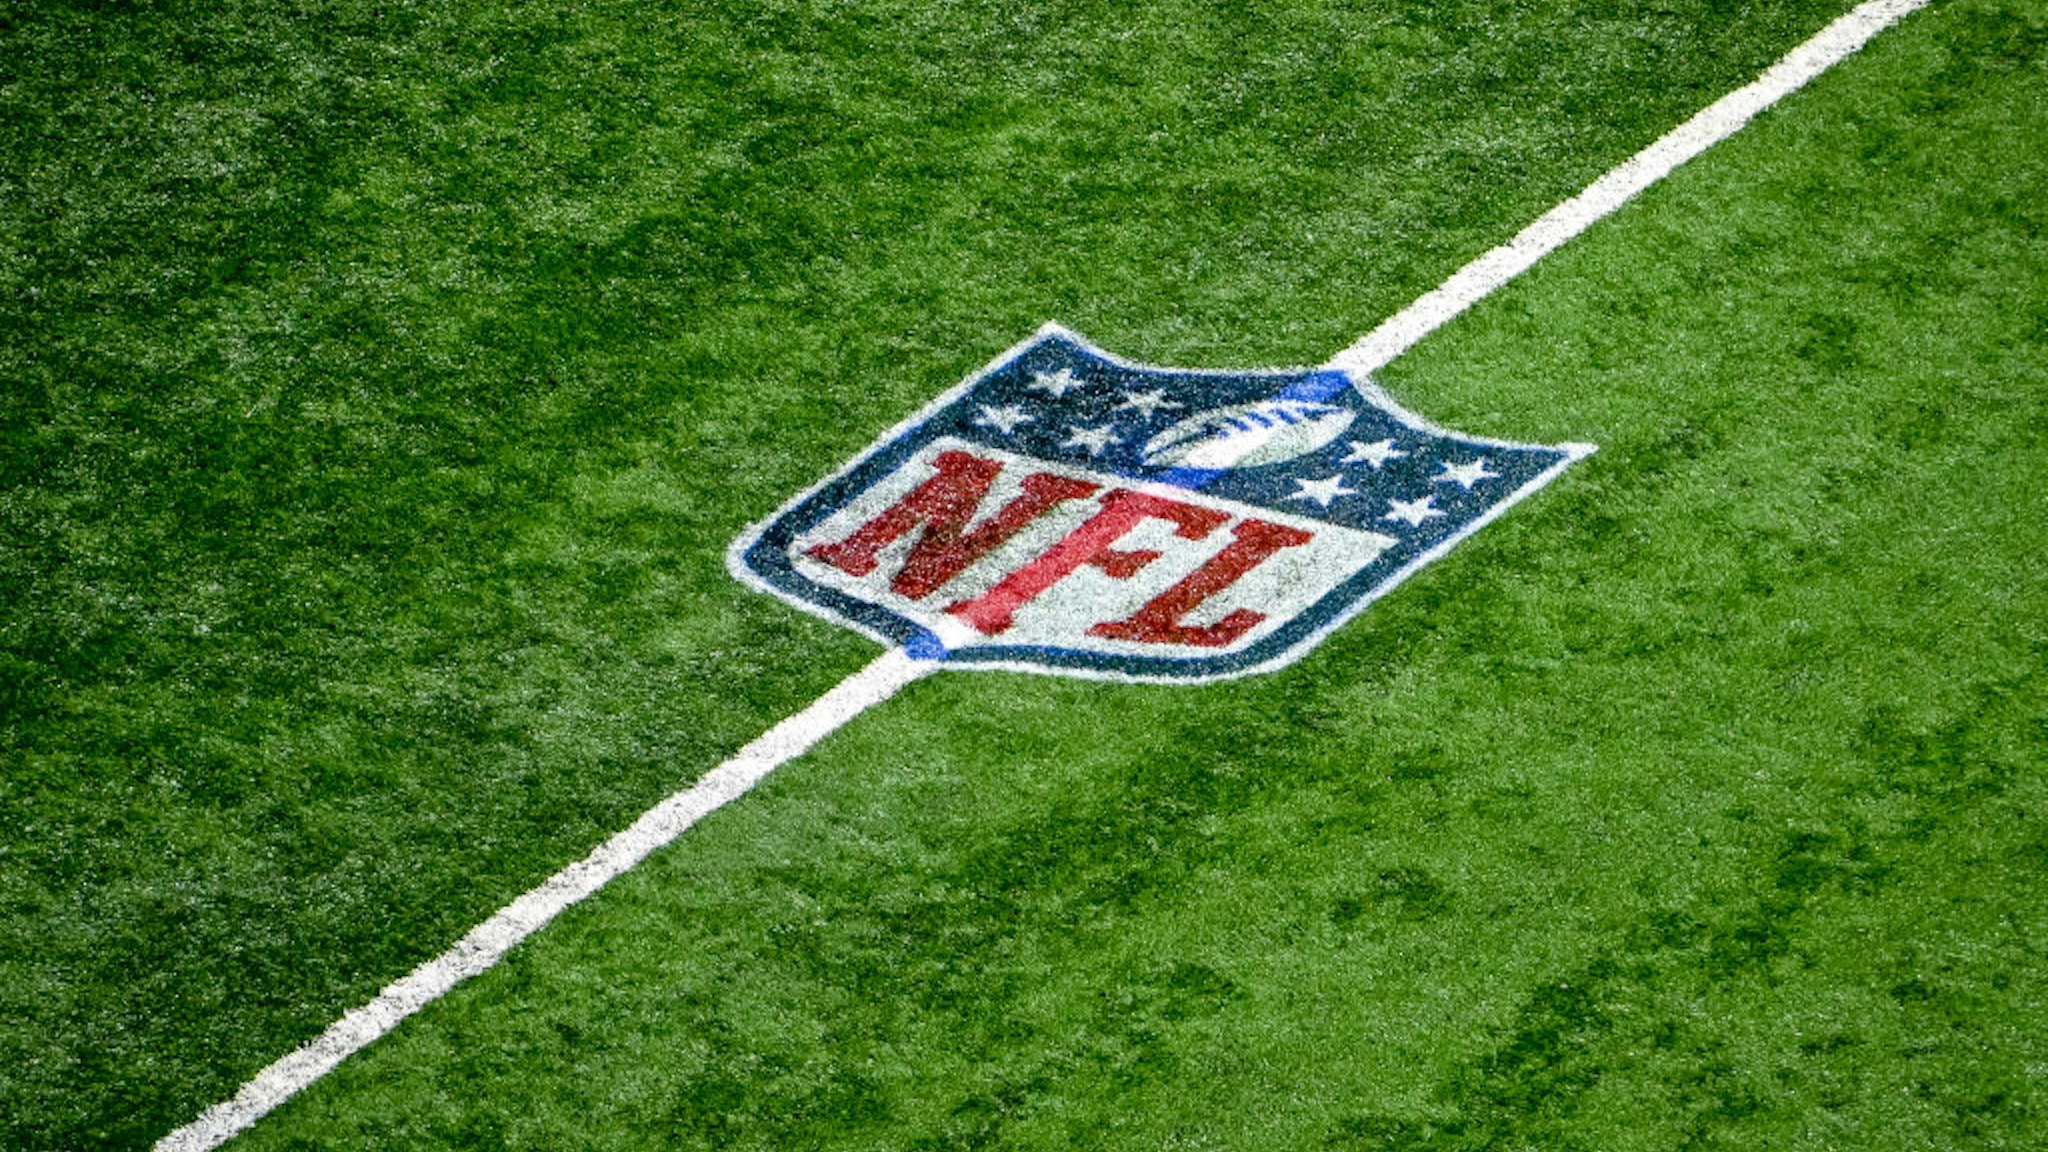 DETROIT, MICHIGAN - DECEMBER 05: The NFL logo is pictured ahead of the game between the Detroit Lions and Minnesota Vikings at Ford Field on December 05, 2021 in Detroit, Michigan. (Photo by Nic Antaya/Getty Images)